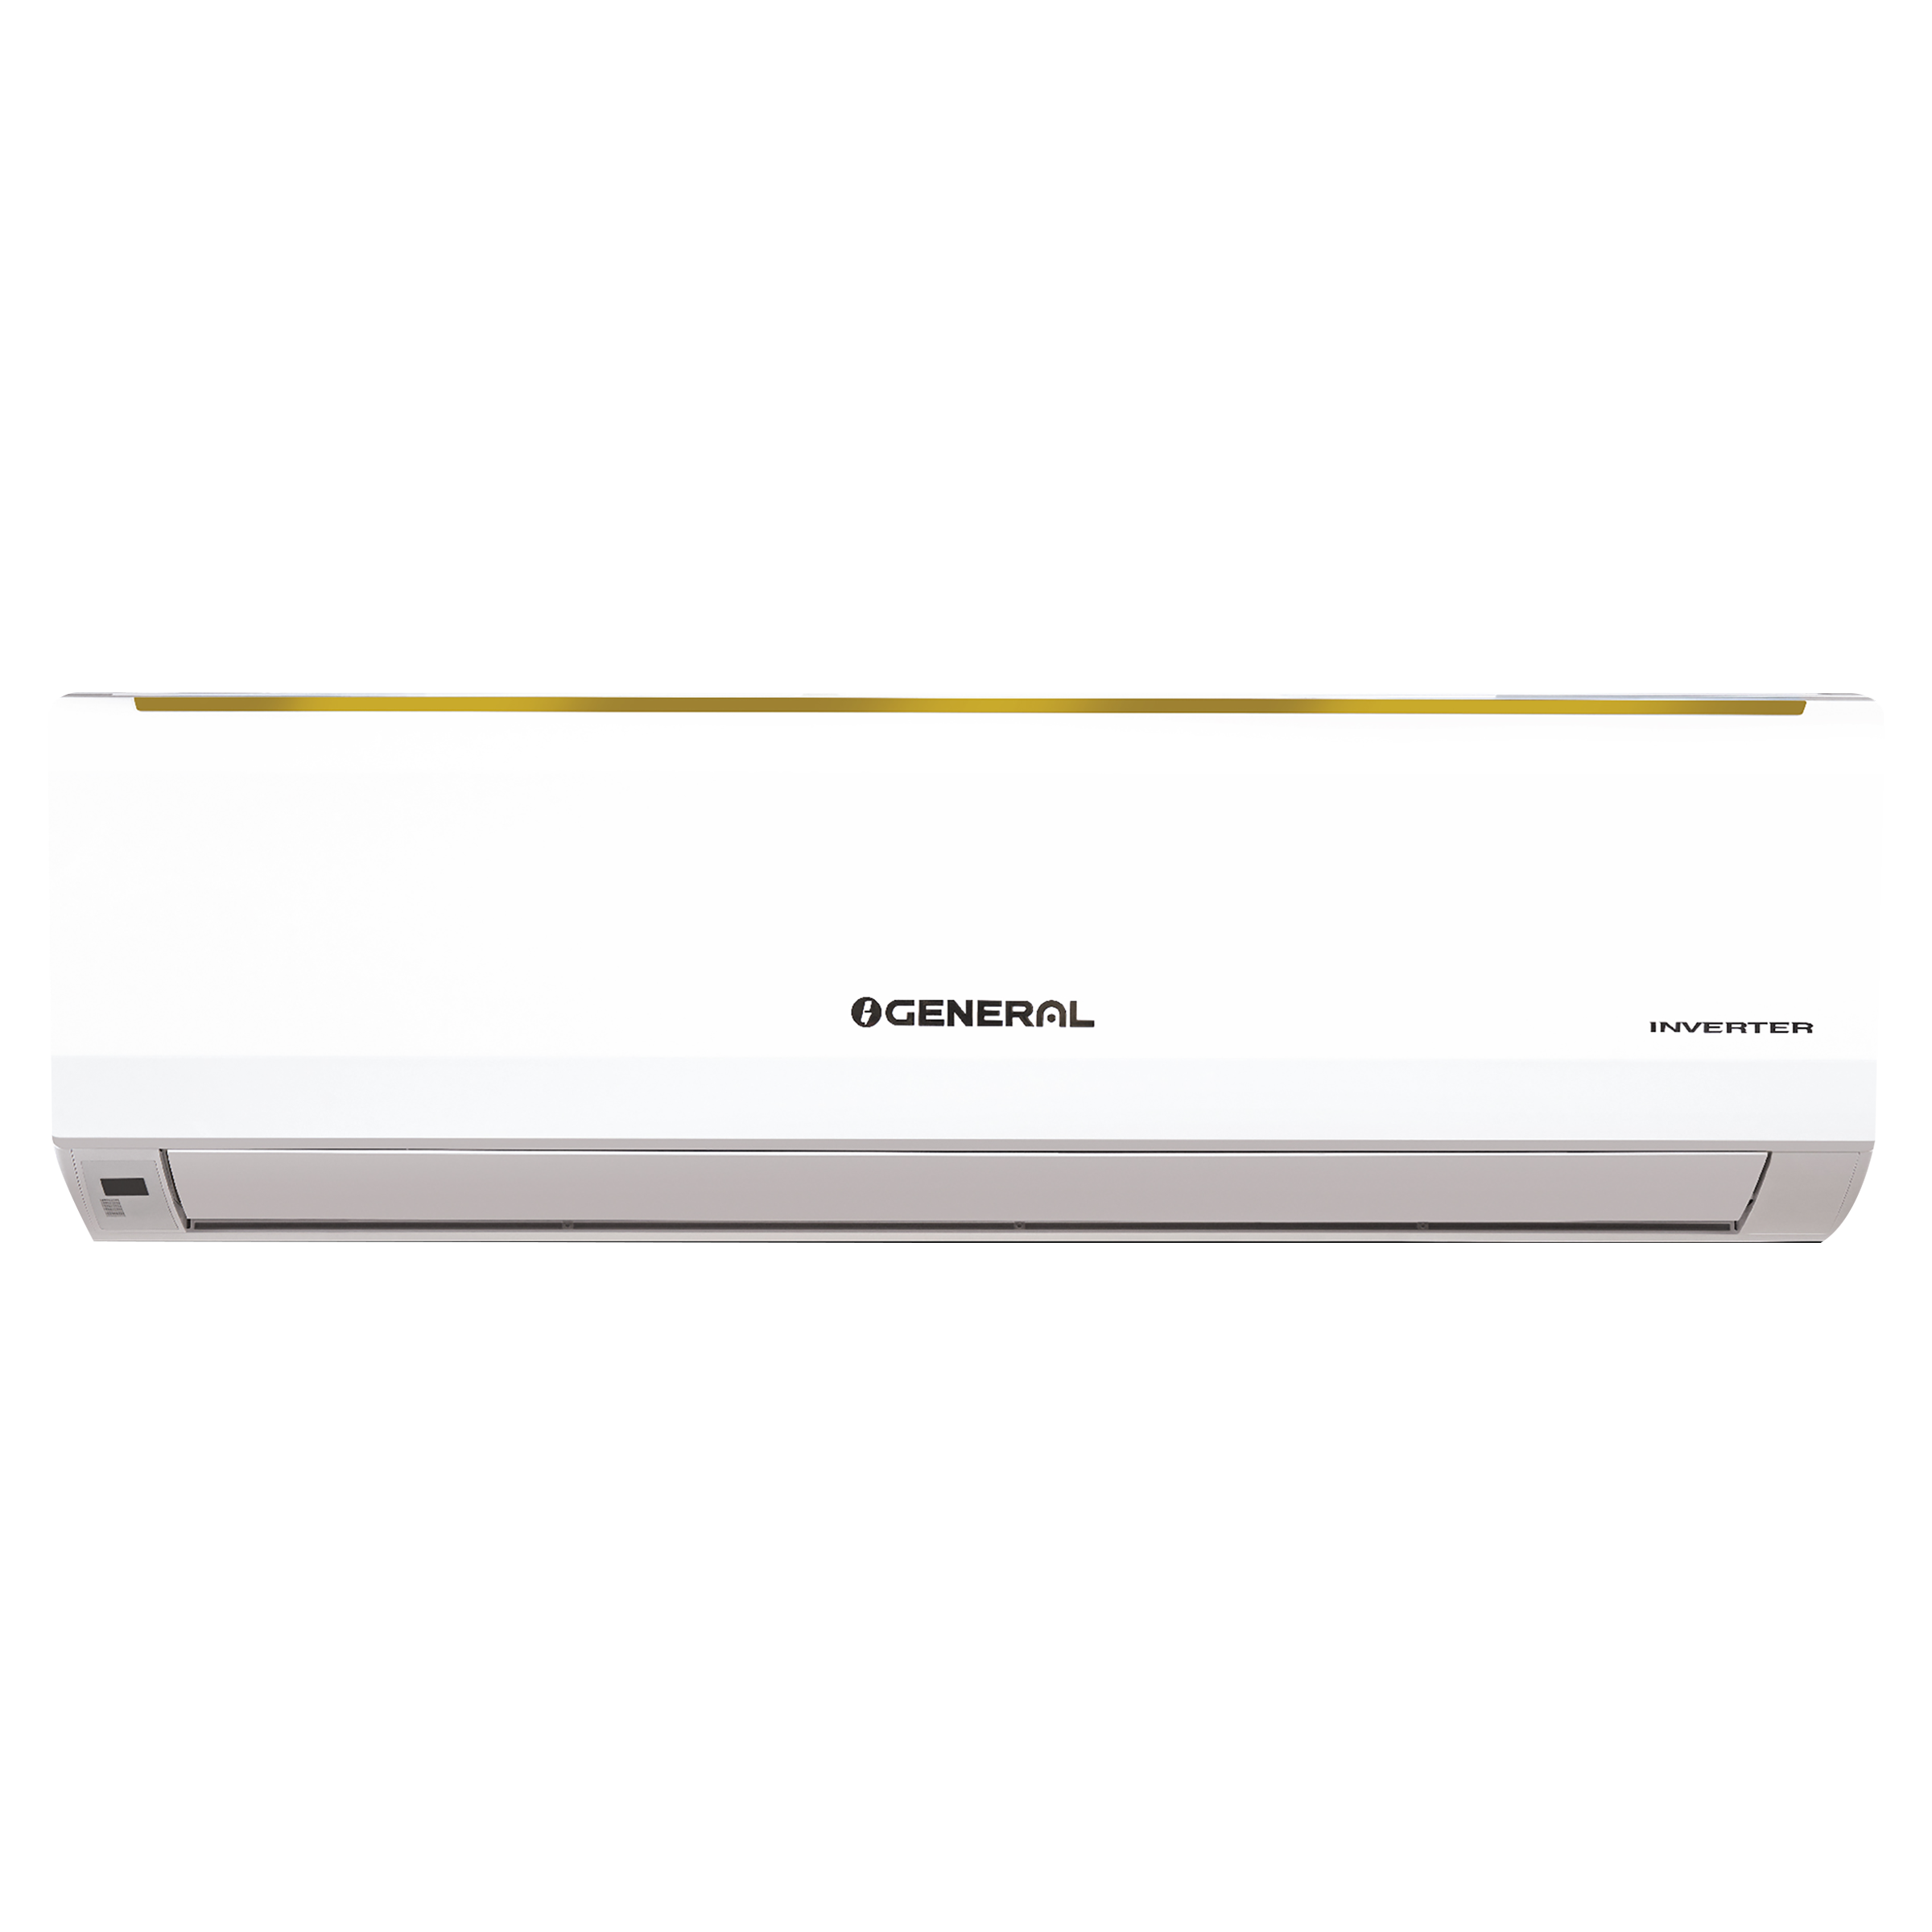 Buy O General CLW Series 1.5 Ton Star Inverter Split AC (Copper Condenser, Dust Filter, ASGA18CLWA-B) Online - Croma